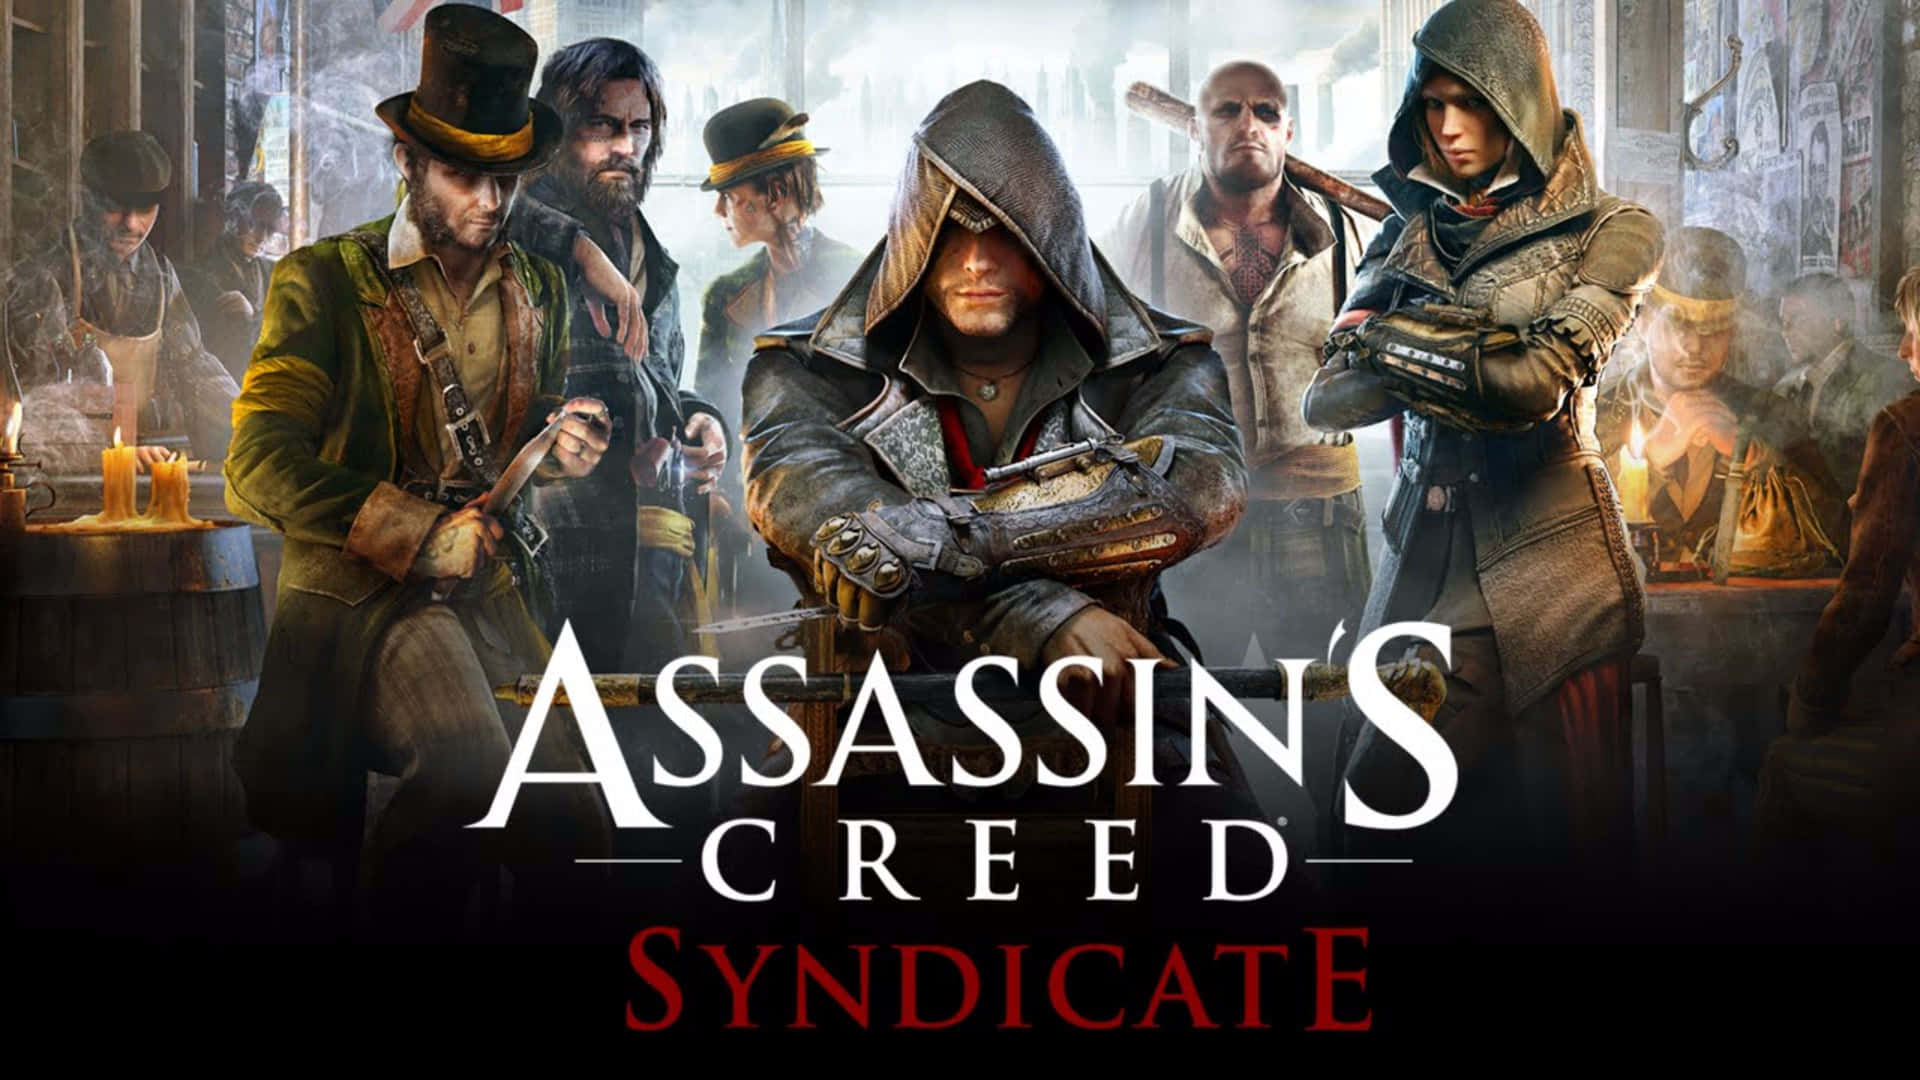 Assassin's Creed Syndicate action-packed gameplay Wallpaper